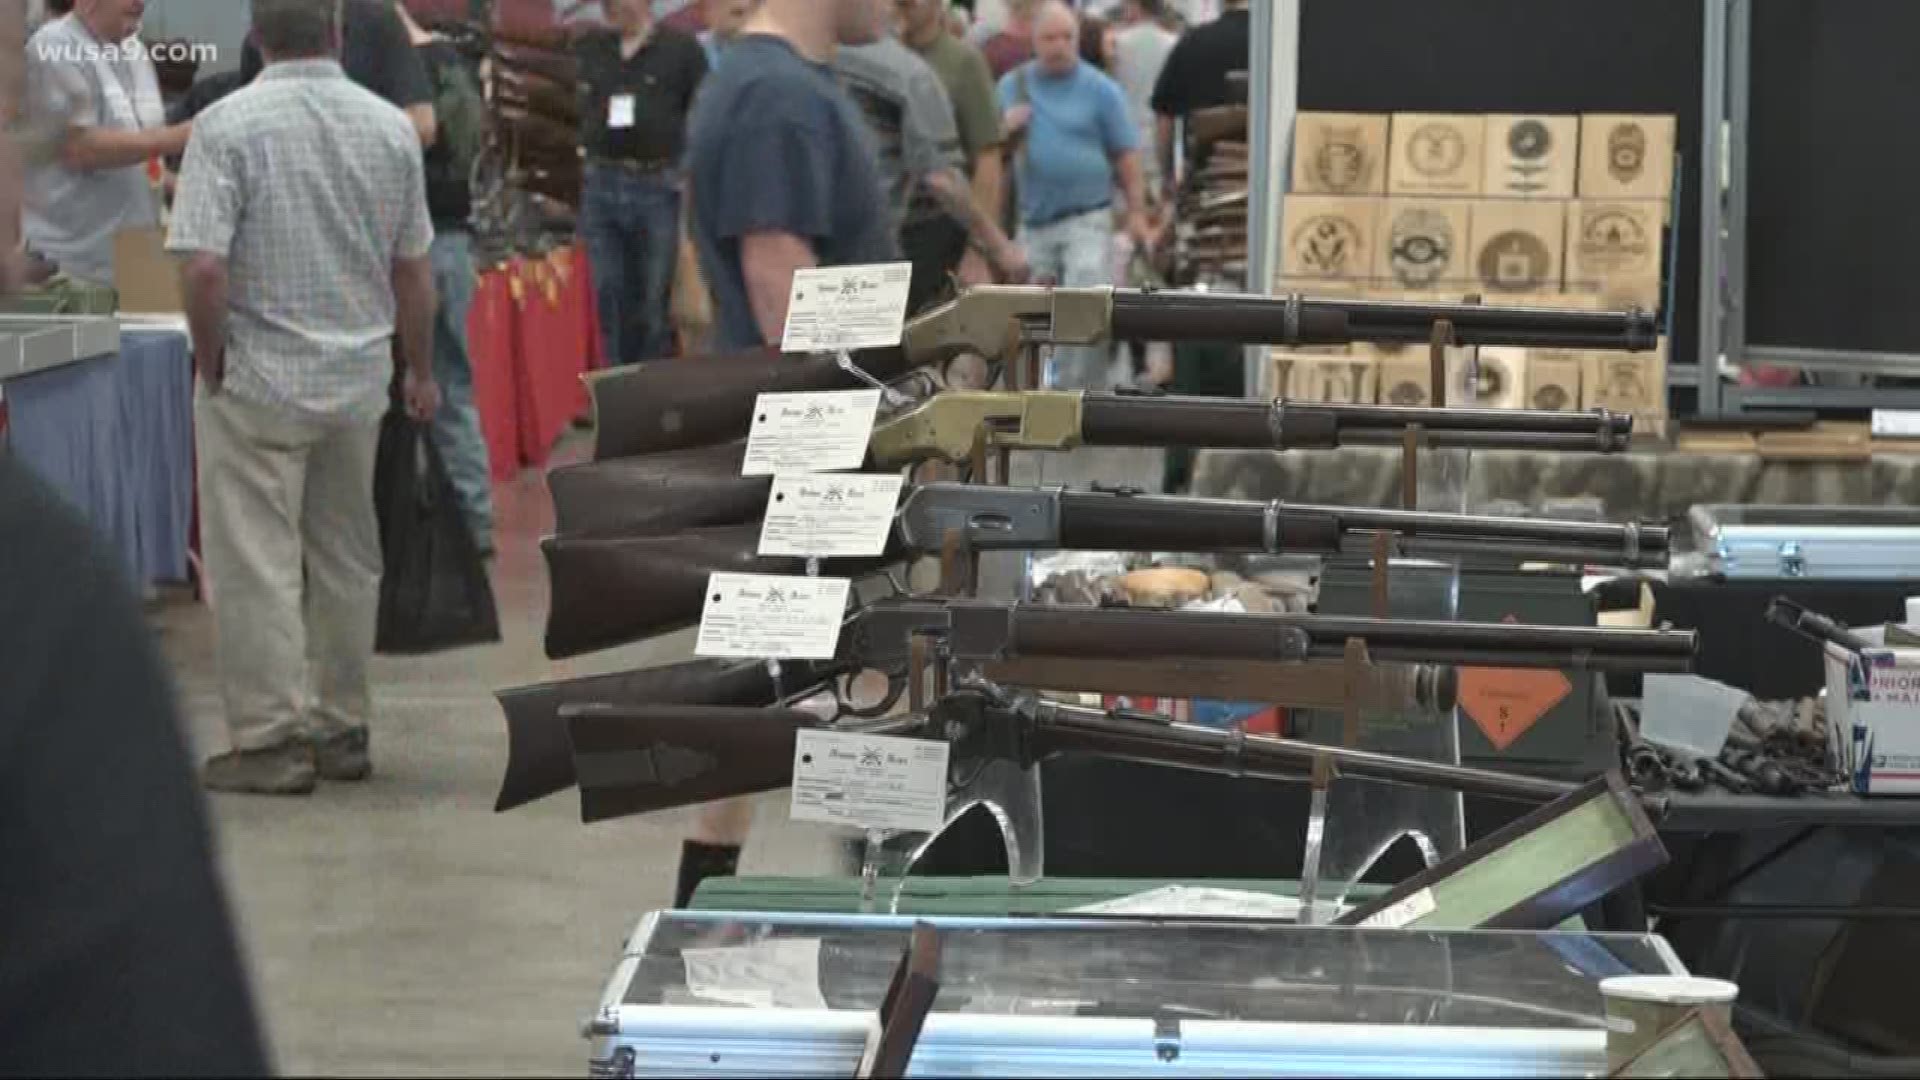 The nation's gun show is taking place in Chantilly, Virginia -- just a few days after Gov. Northam announced he would be holding a special session to look into tightening Virginia's gun laws.